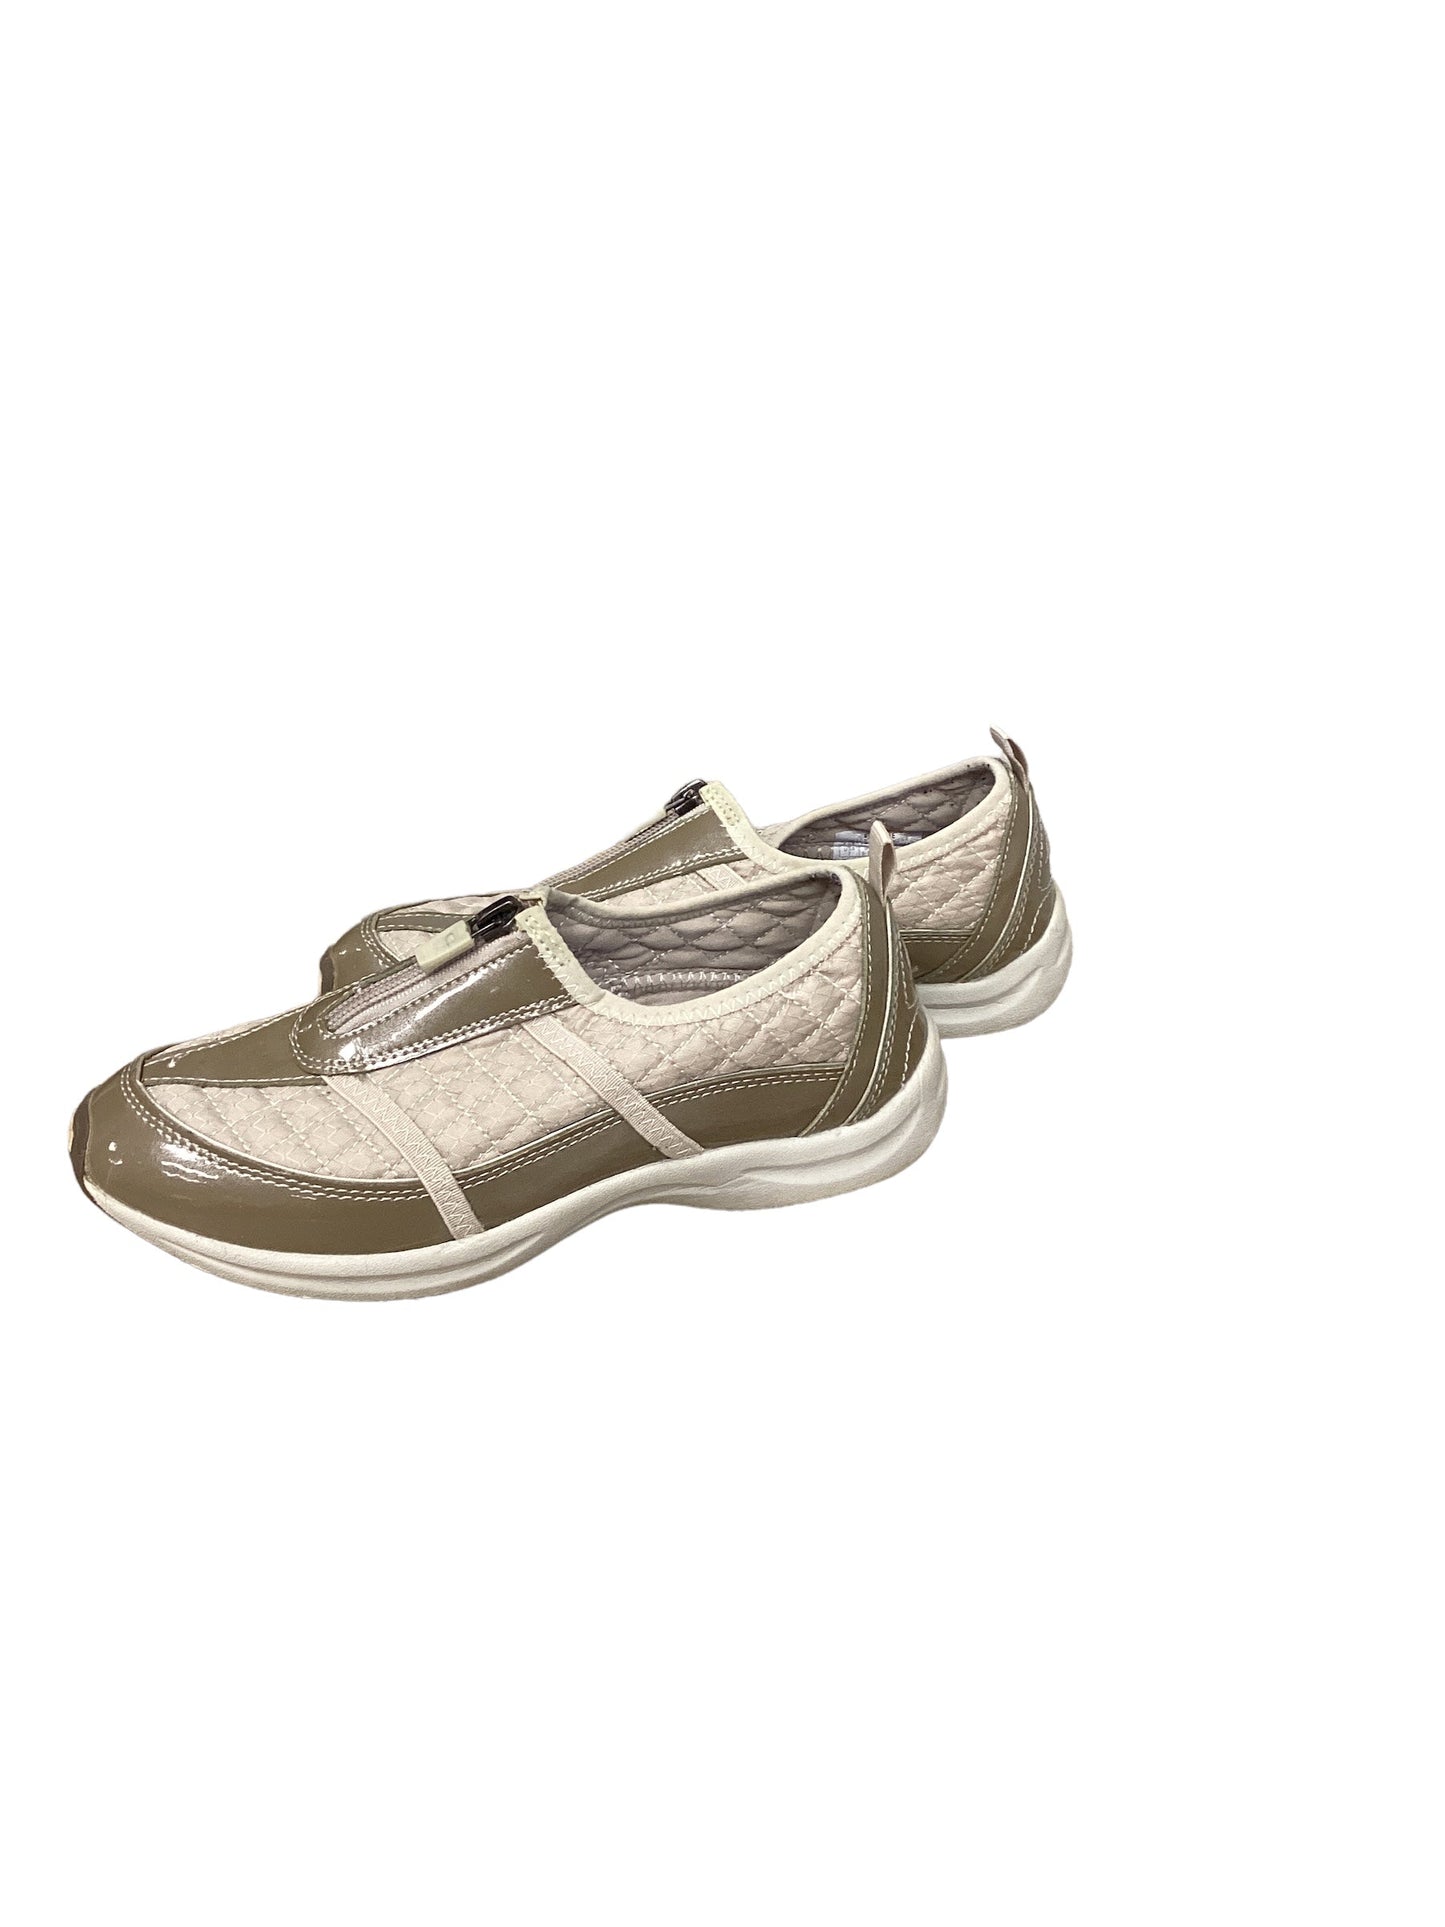 Shoes Sneakers By Easy Spirit  Size: 5.5